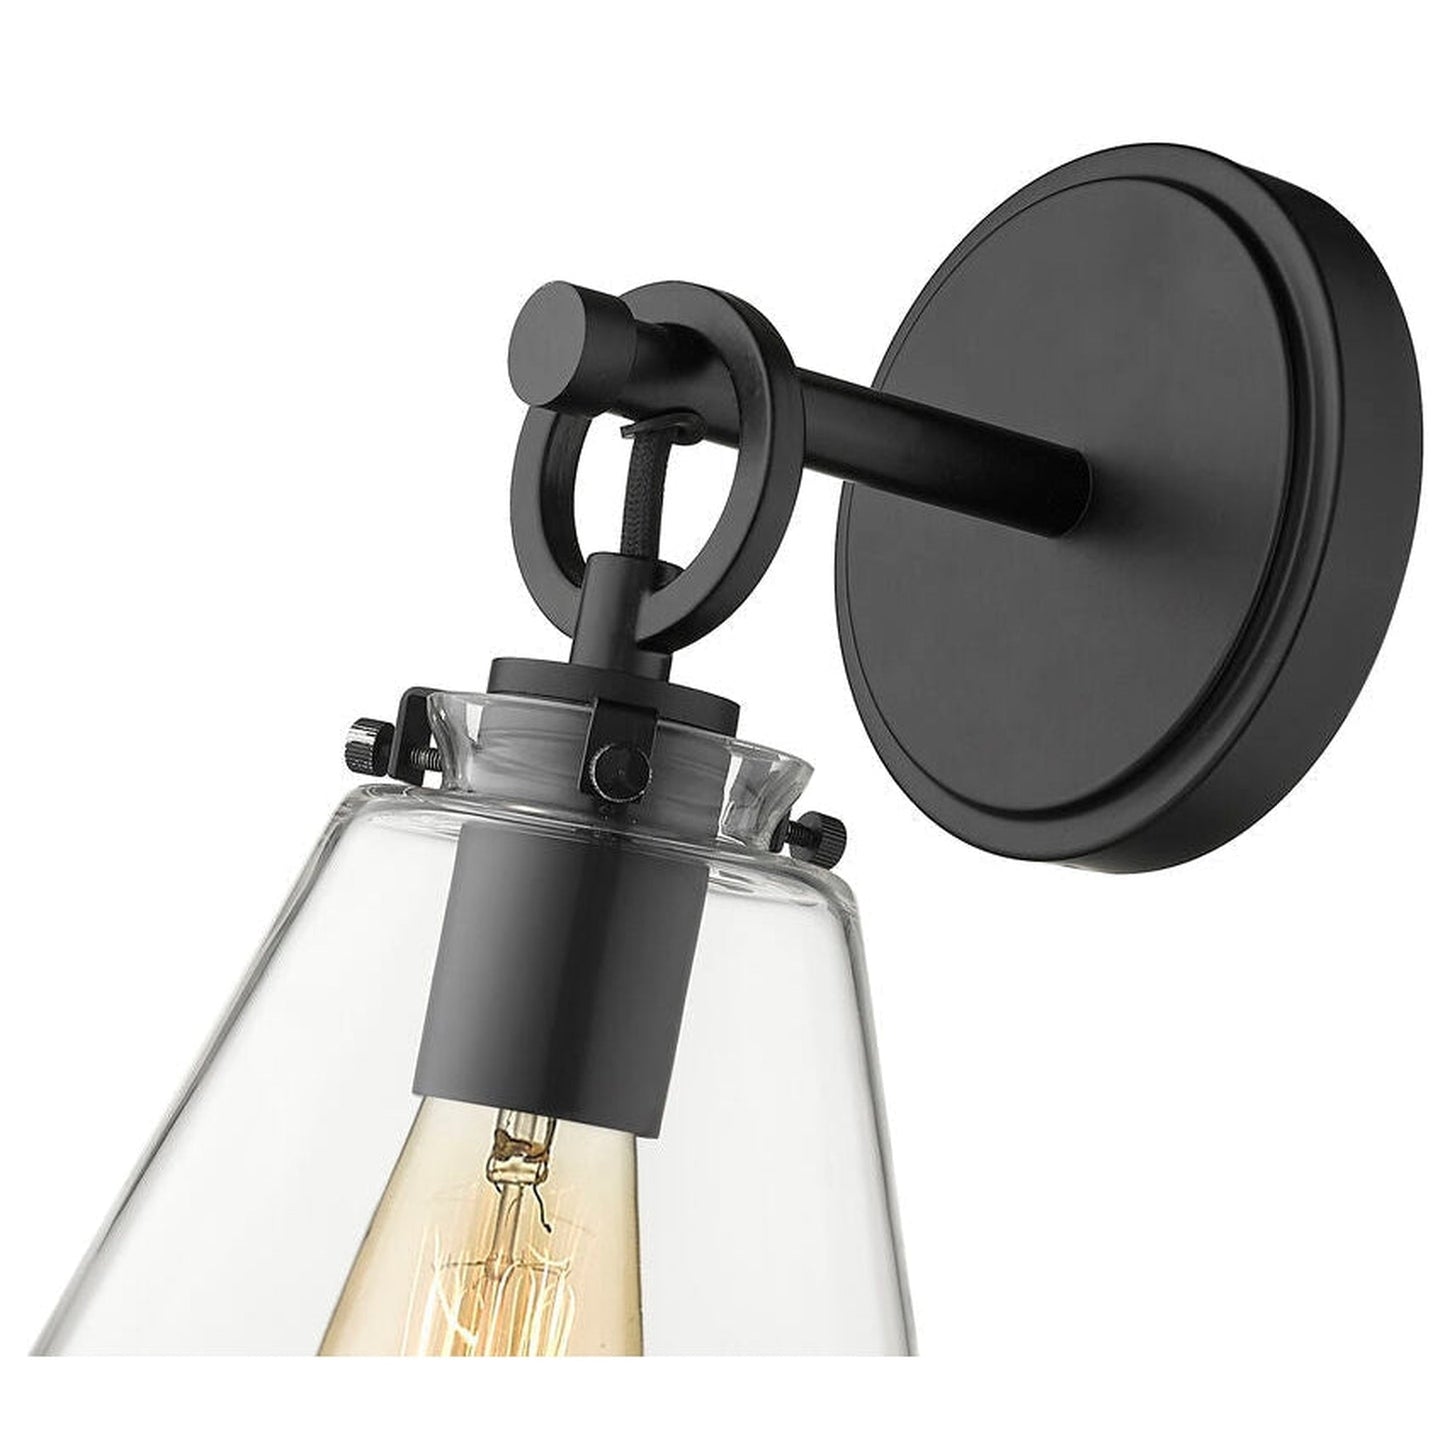 Z-Lite Harper 8" 1-Light Matte Black Wall Sconce With Clear Glass Shade